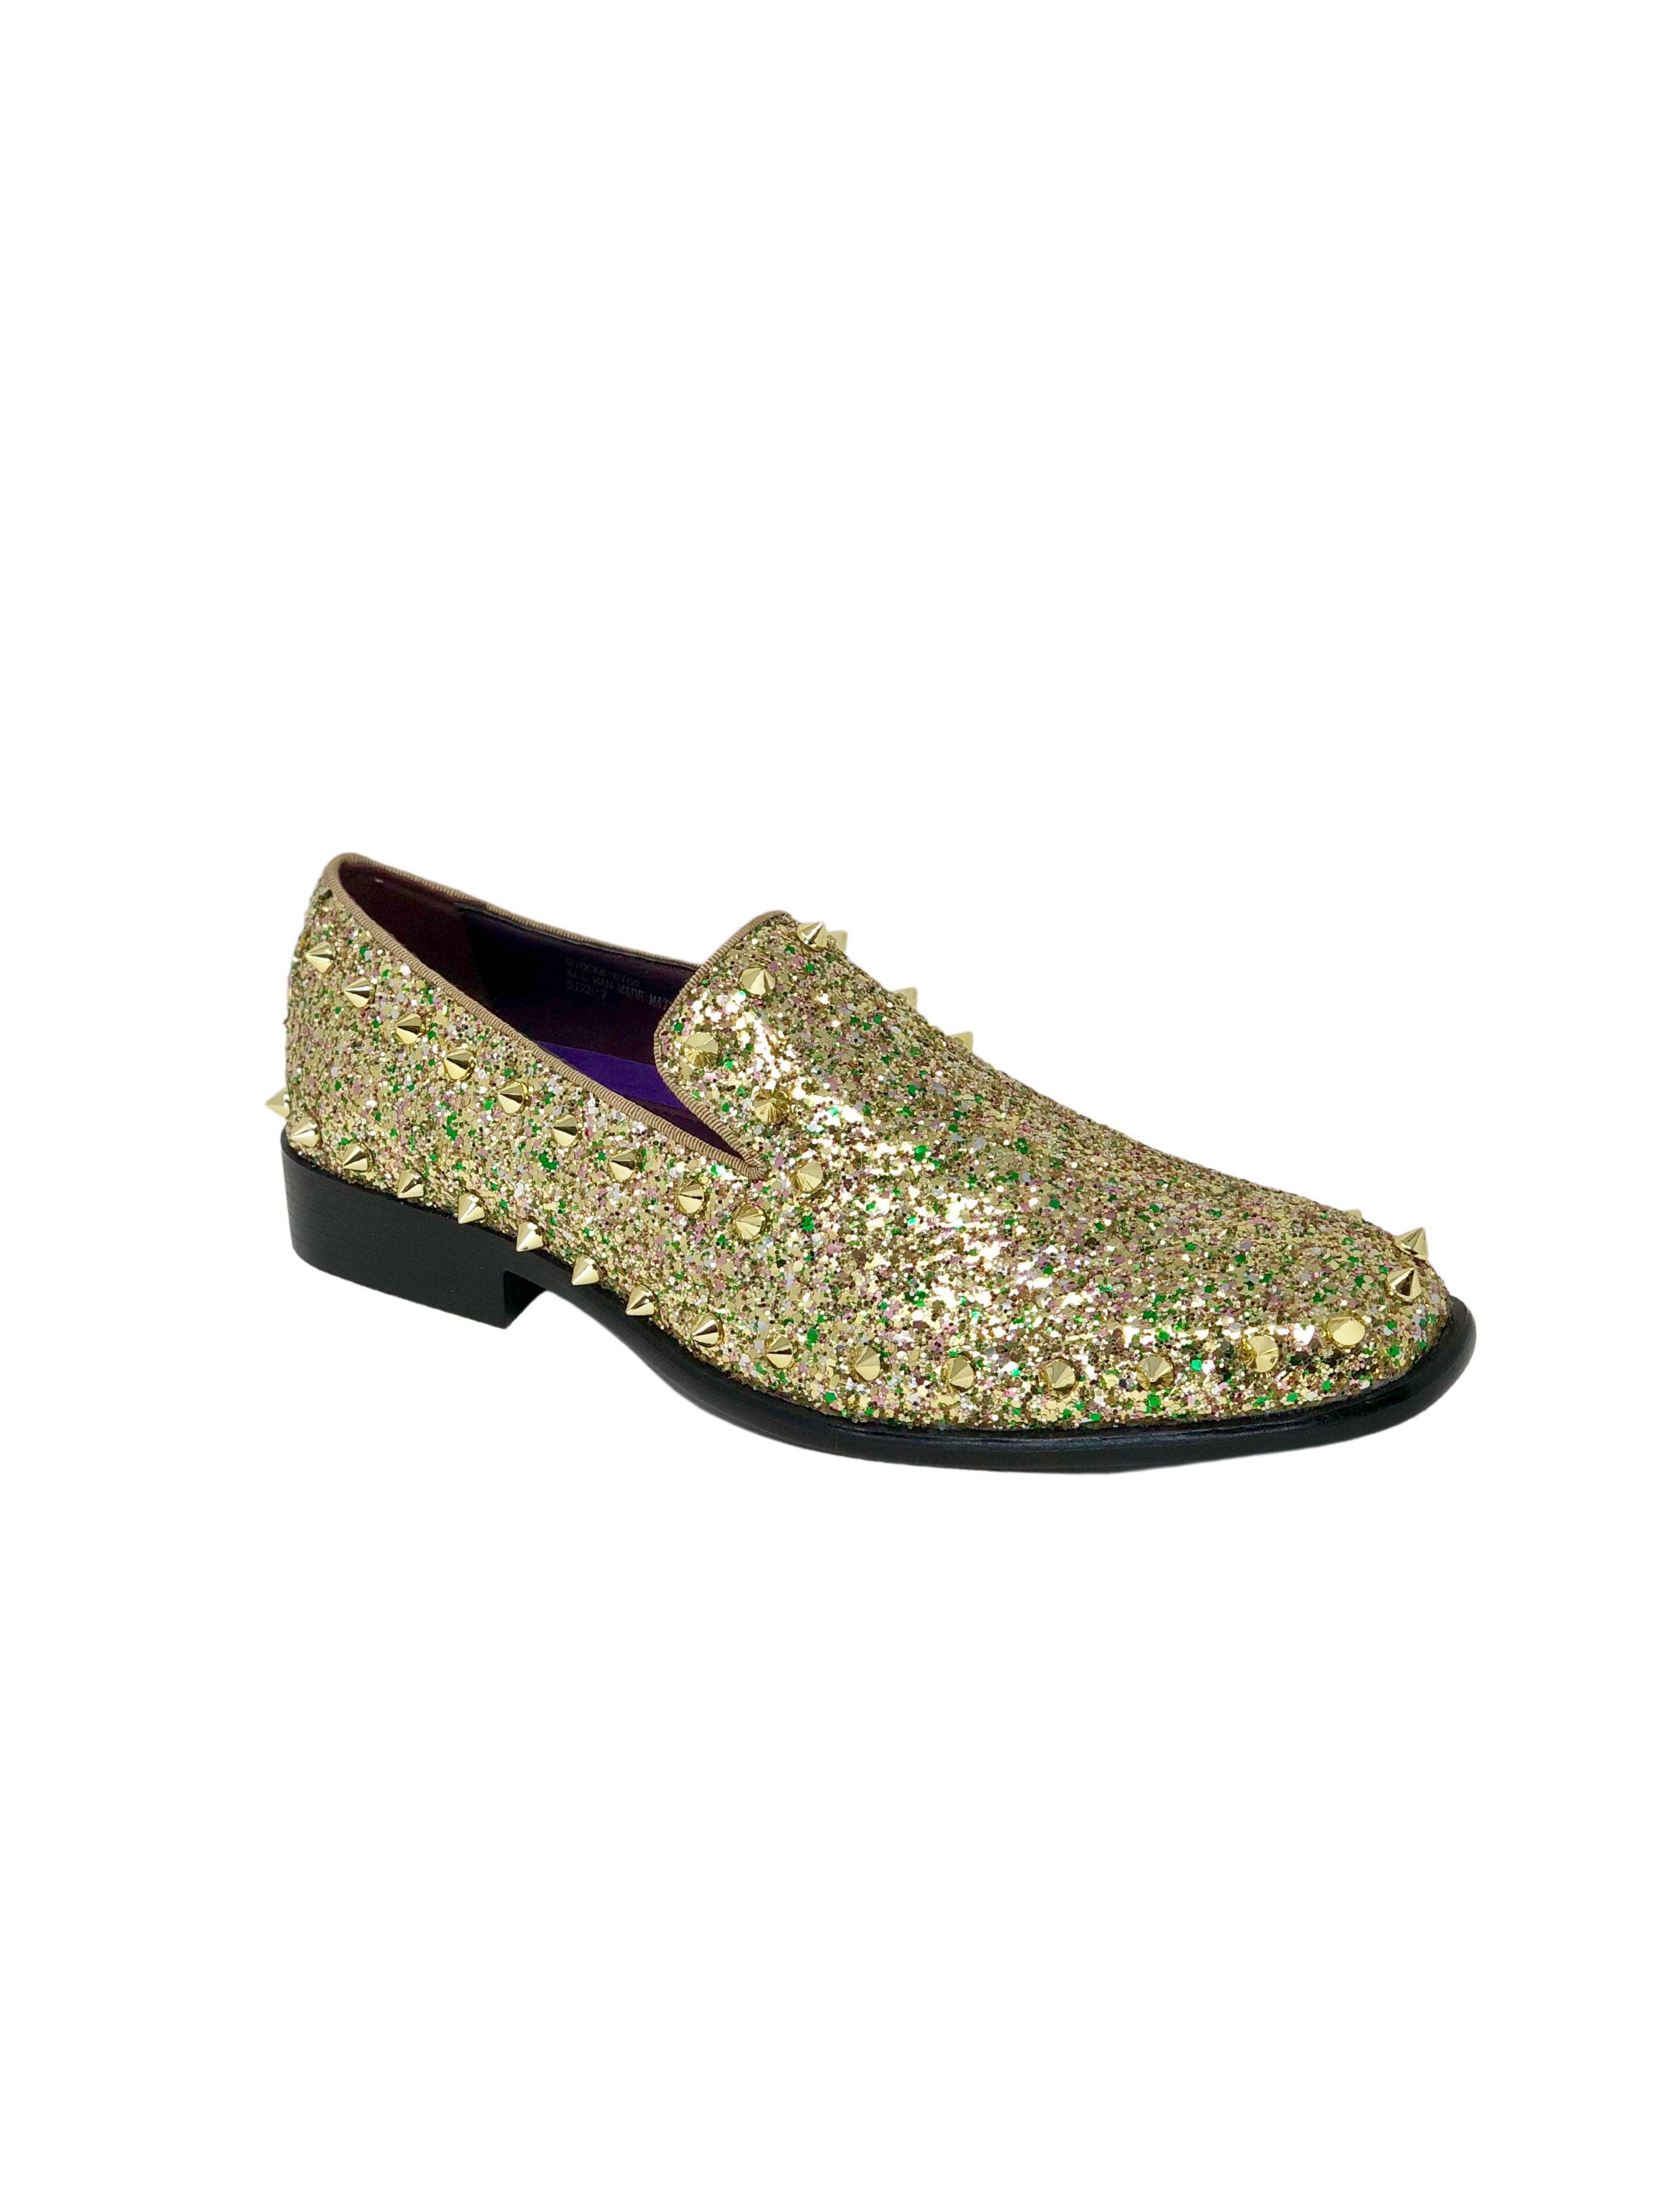 After Midnight Gold multi colored shoe with gold spikes